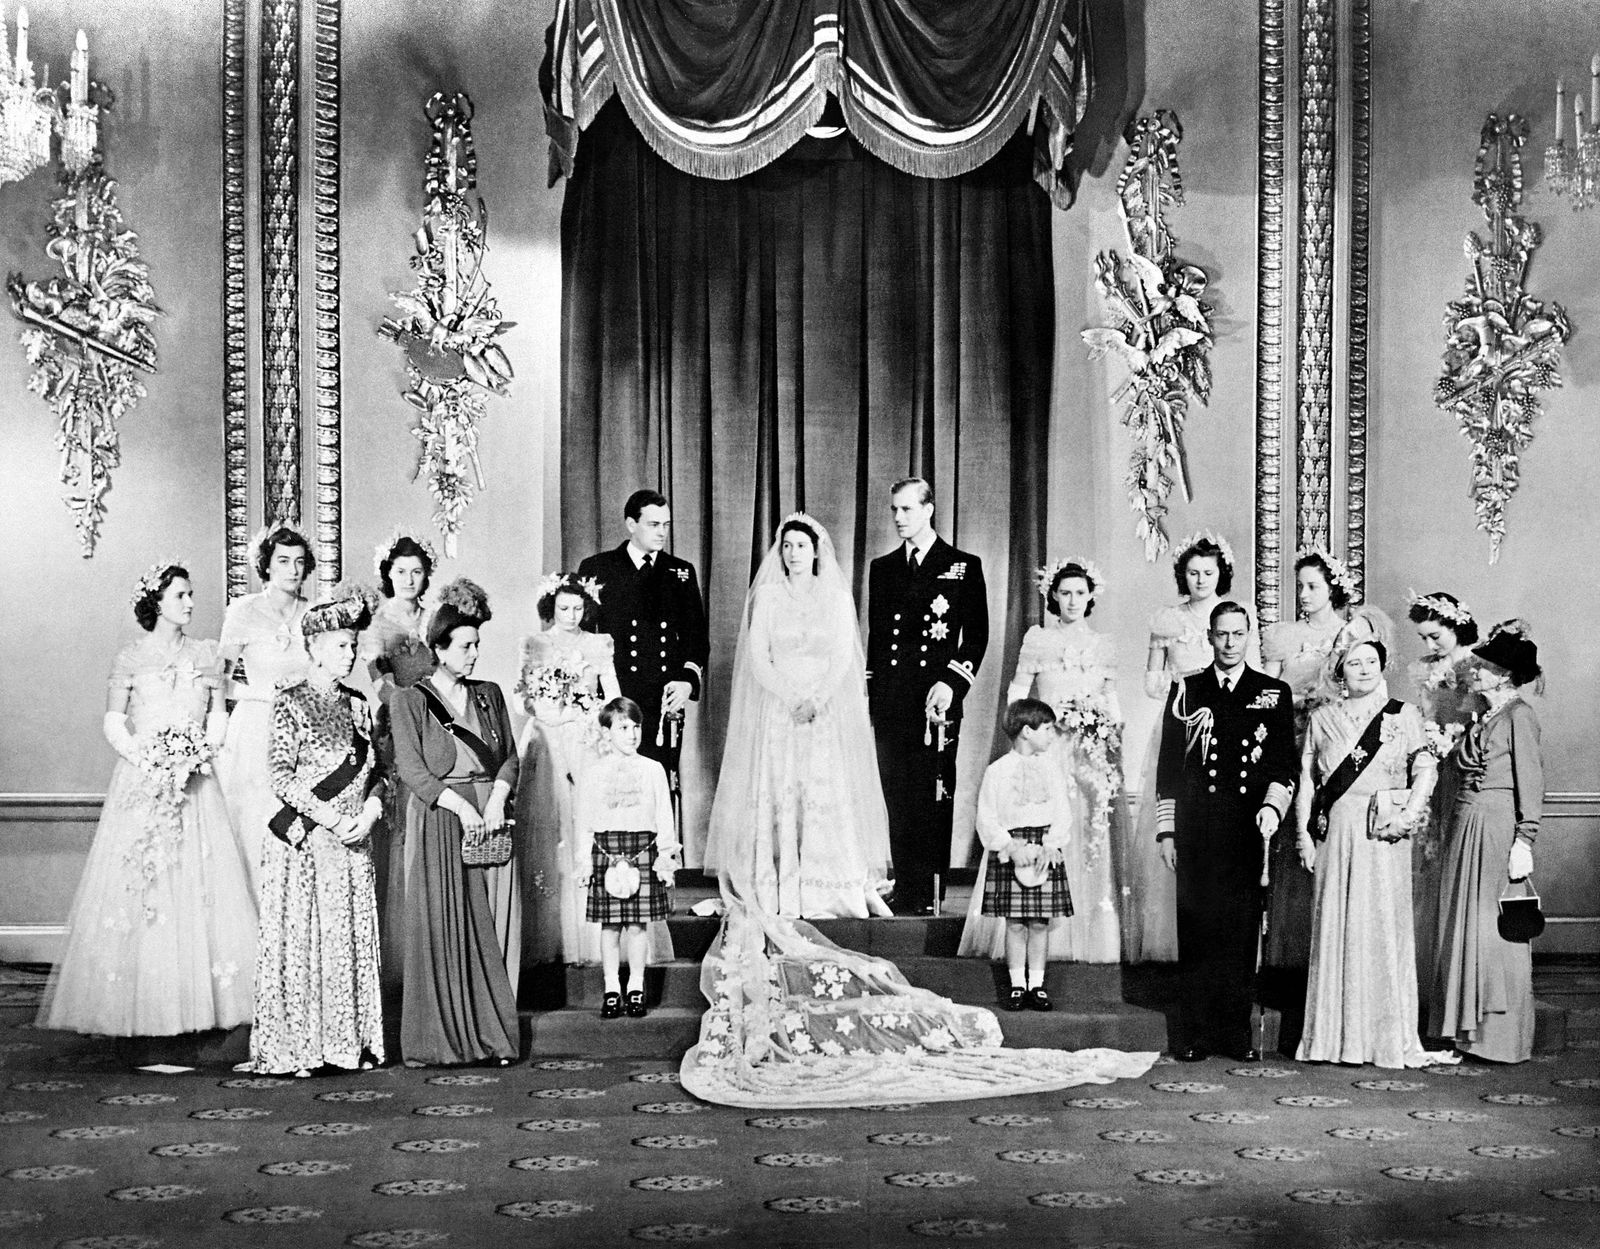 (FILES) In this file photo taken on November 20, 1947 members of the British Royal family and guests pose around Princess Elizabeth (future Queen Elizabeth II) (CL) and Philip, Duke of Edinburgh (CR) (future Prince Philip); at right the group includes Britain's King George VI (5R) stood next to Queen Elizabeth (3R) with Princess Alice of Athlone (R) and in front of bridemaids that include Princess Margaretb (7R) stood next to Philip; at left the group includes the best man David Mountbatten, Marquess of Milford Haven (7L) stood next to Princess Elizabeth, Mary of Teck (3L), mother of King George VI, stands at left in front of the bridesmaids next to Princess Alice of Battenberg (5L), Philip's mother; the page boys are Prince William of Gloucester and Prince Michael of Kent; in the Throne Room at Buckingham Palace on their wedding day. - Queen Elizabeth II, the longest-serving monarch in British history and an icon instantly recognisable to billions of people around the world, has died aged 96, Buckingham Palace said on September 8, 2022.  Her eldest son, Charles, 73, succeeds as king immediately, according to centuries of protocol, beginning a new, less certain chapter for the royal family after the queen's record-breaking 70-year reign. (Photo by AFP) - AFP